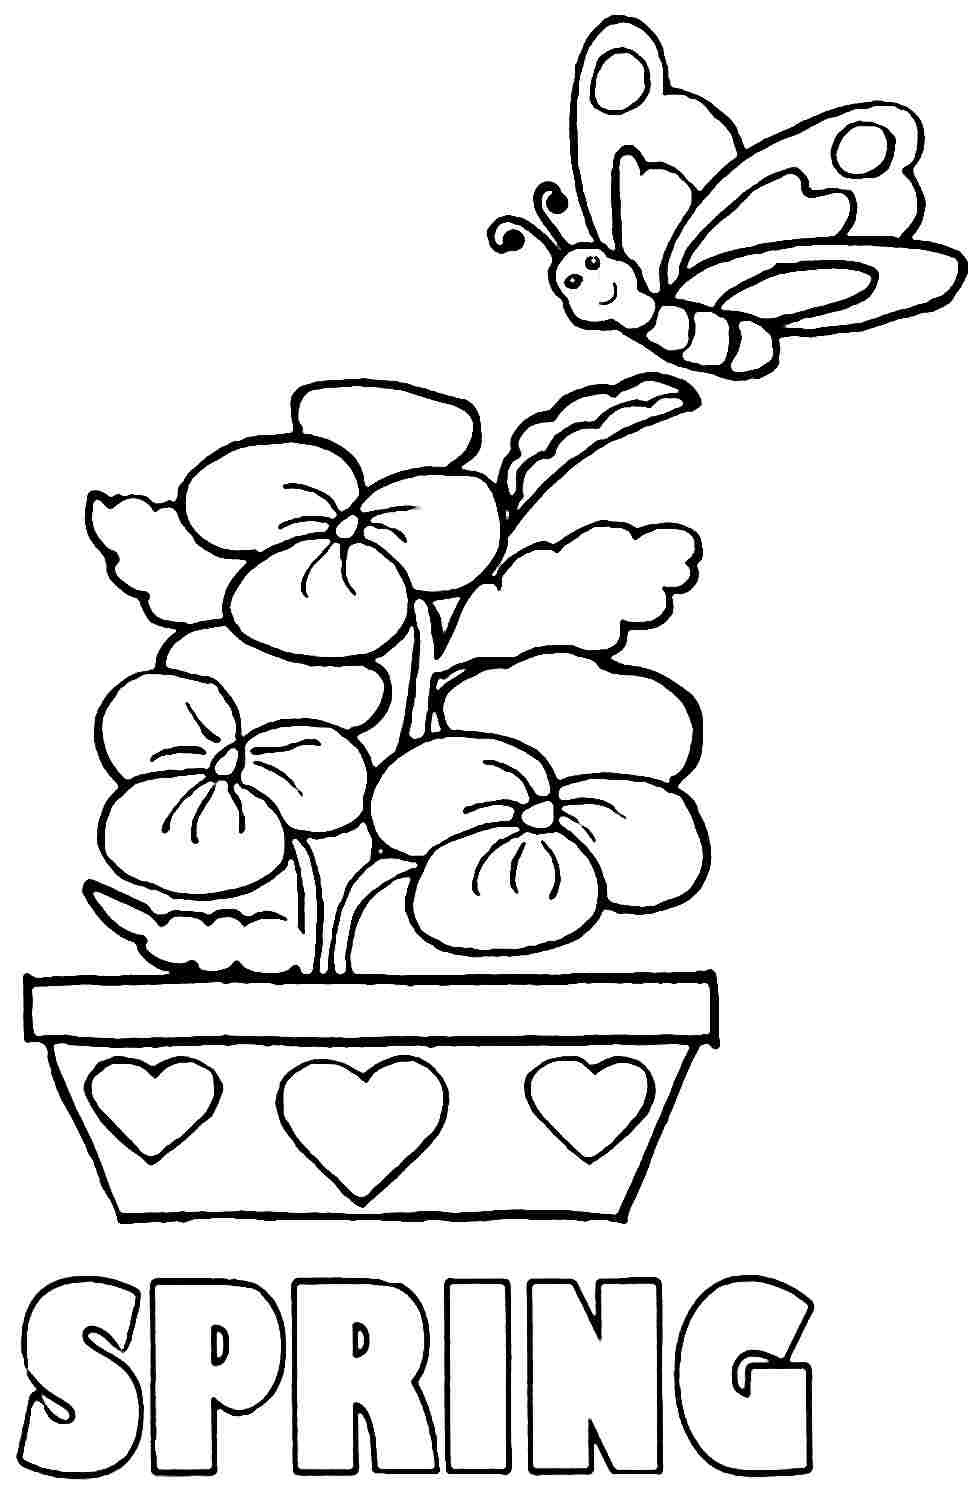 Free Spring Coloring Pages For Kids
 Free Spring Coloring Pages For Kids at GetDrawings